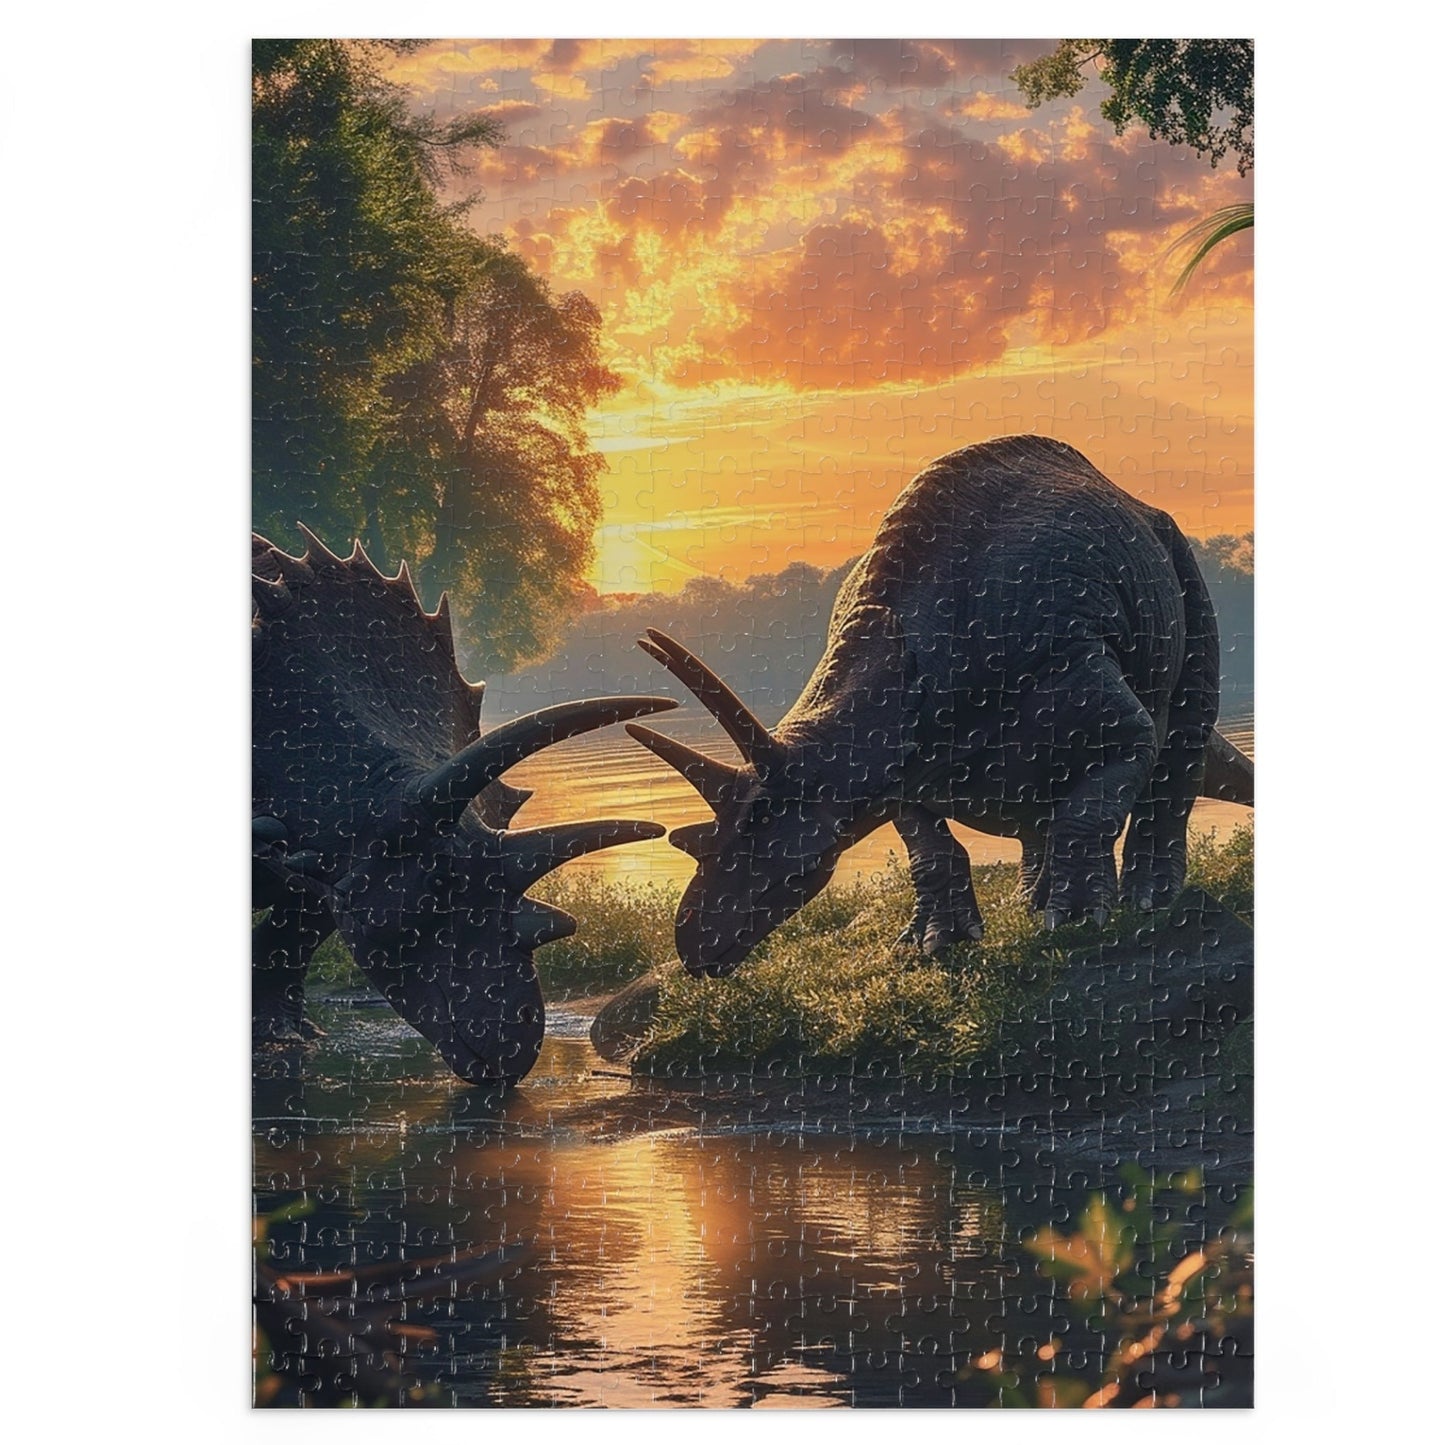 Dinosaurs Taking a Drink  Jigsaw Puzzle (30, 110, 252, 500,1000-Piece)